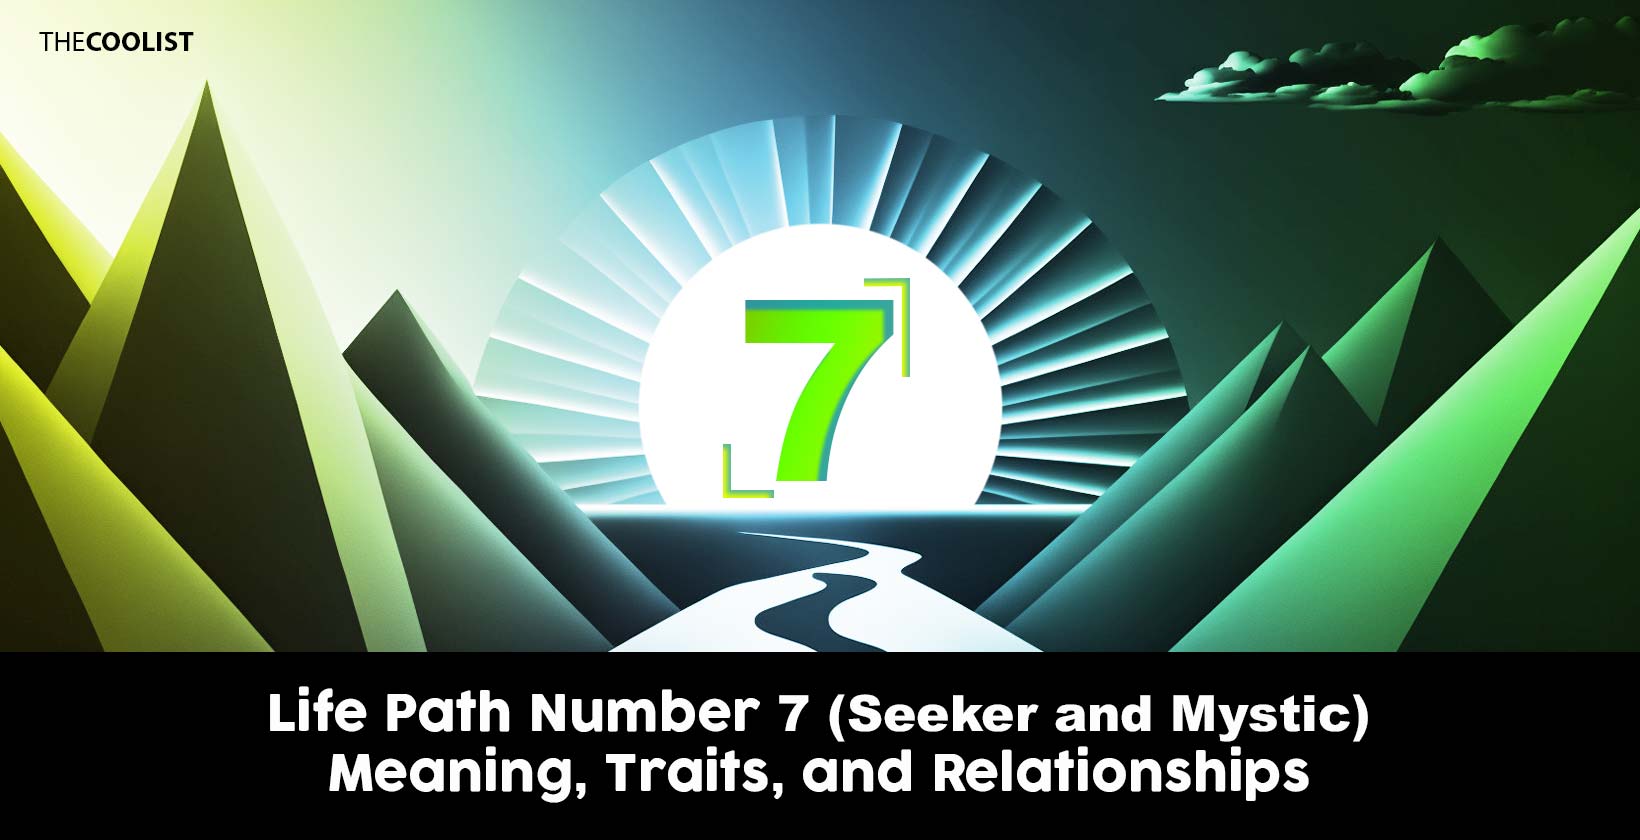 Life Path Number 7 (Seeker and Mystic) Meaning, Traits, and Relationships